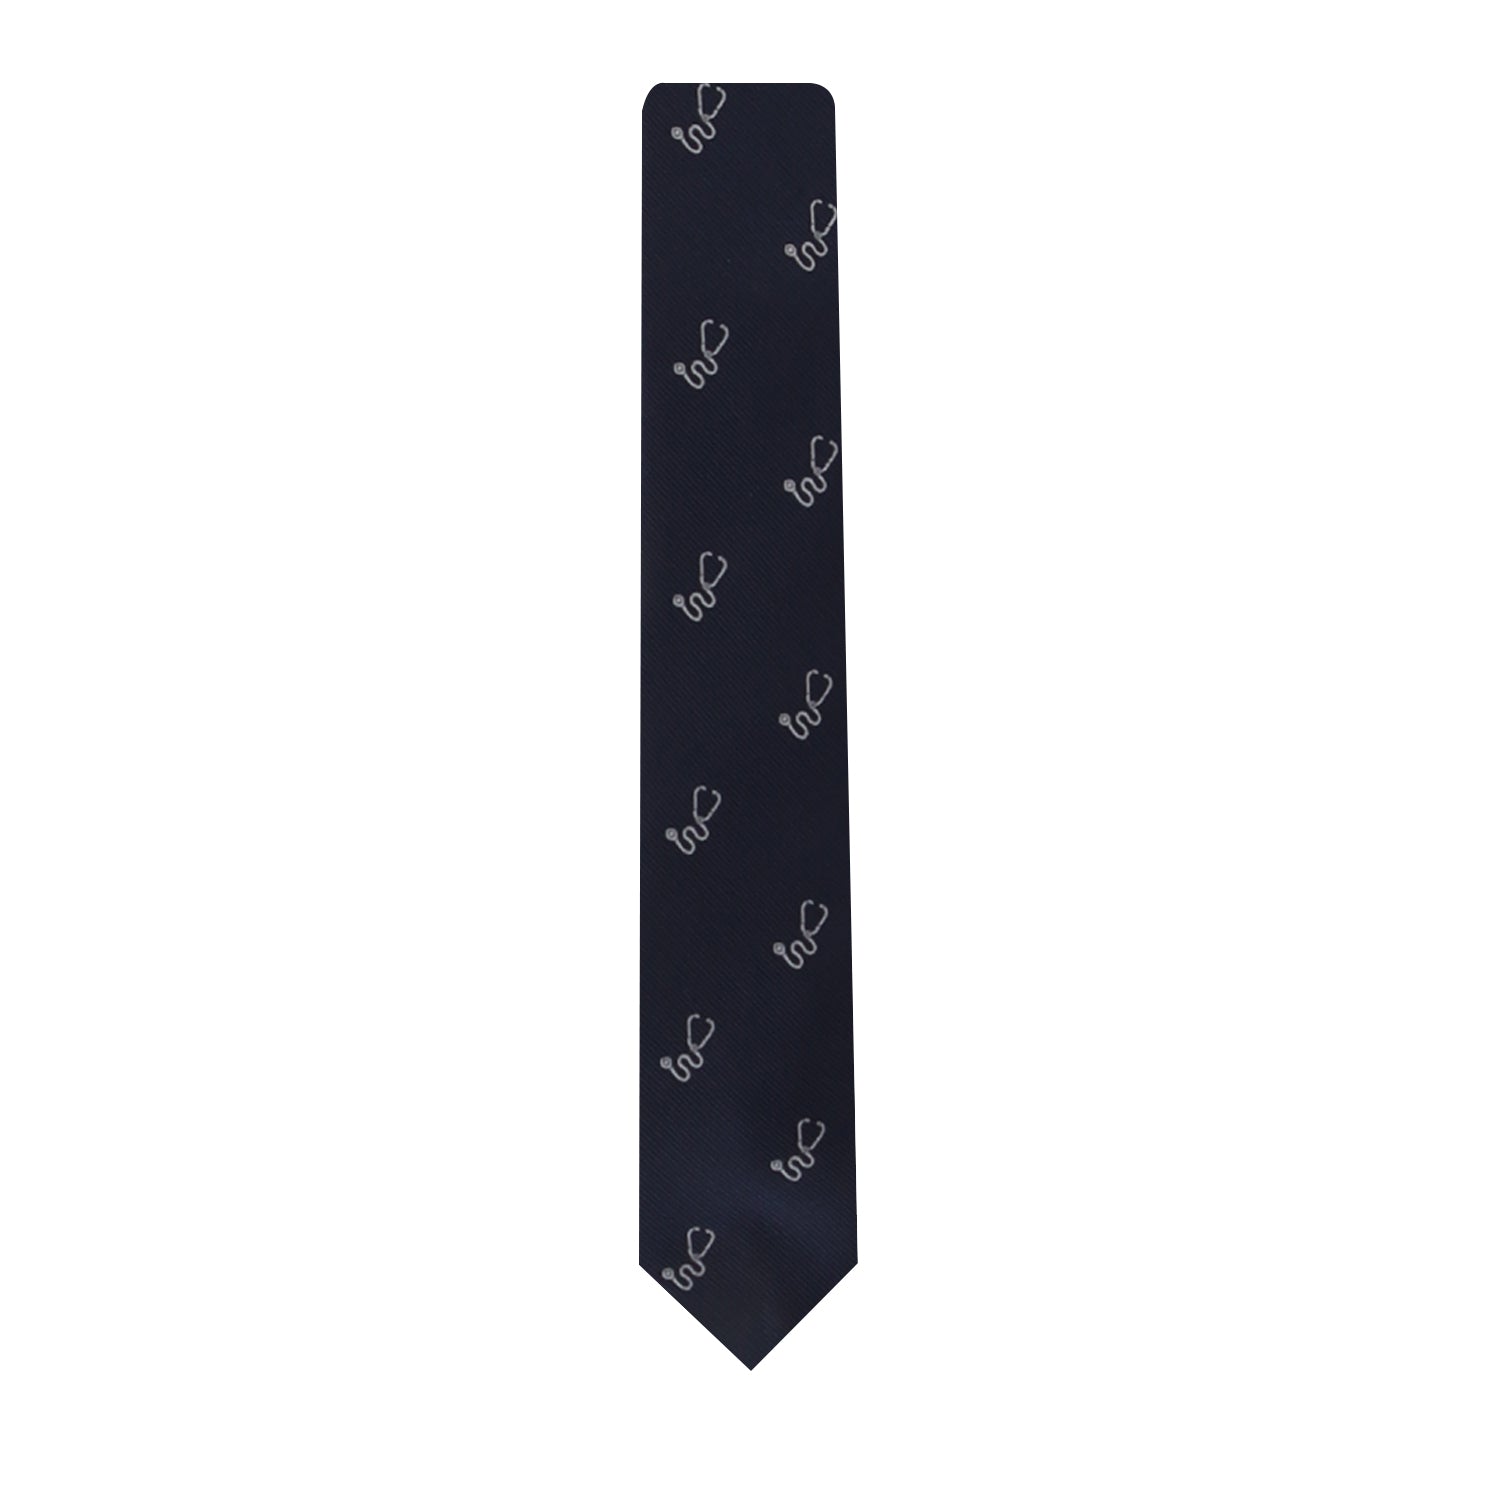 An extraordinary Stethoscope Skinny Tie adorned with an anchor design.